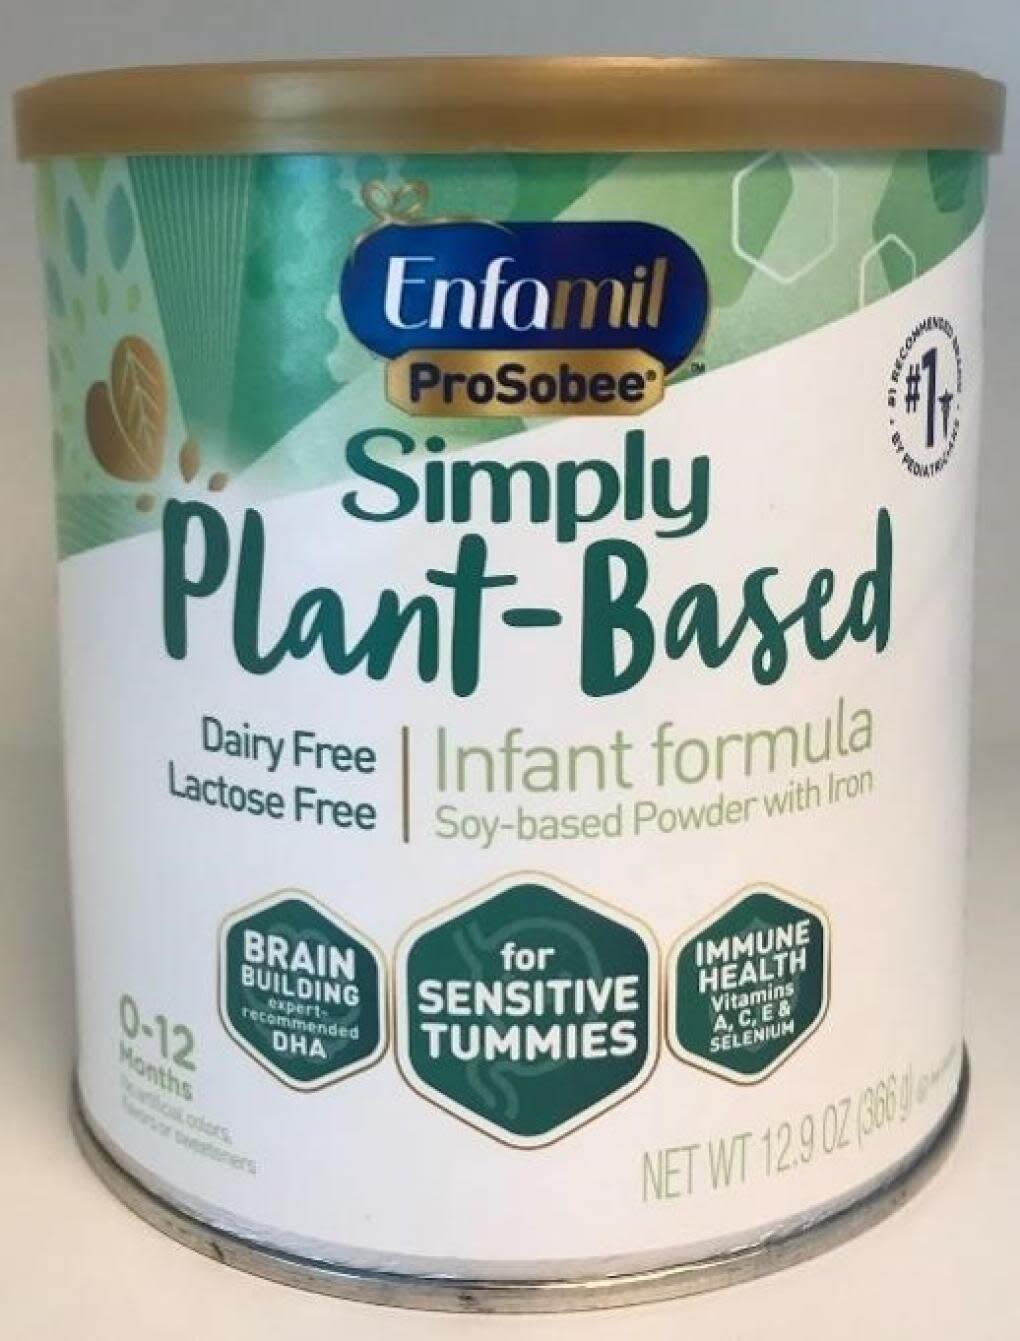 FDA Announces Reckitt's Voluntary Recall of ProSobee Simply Plant-Based Infant Formula Batches